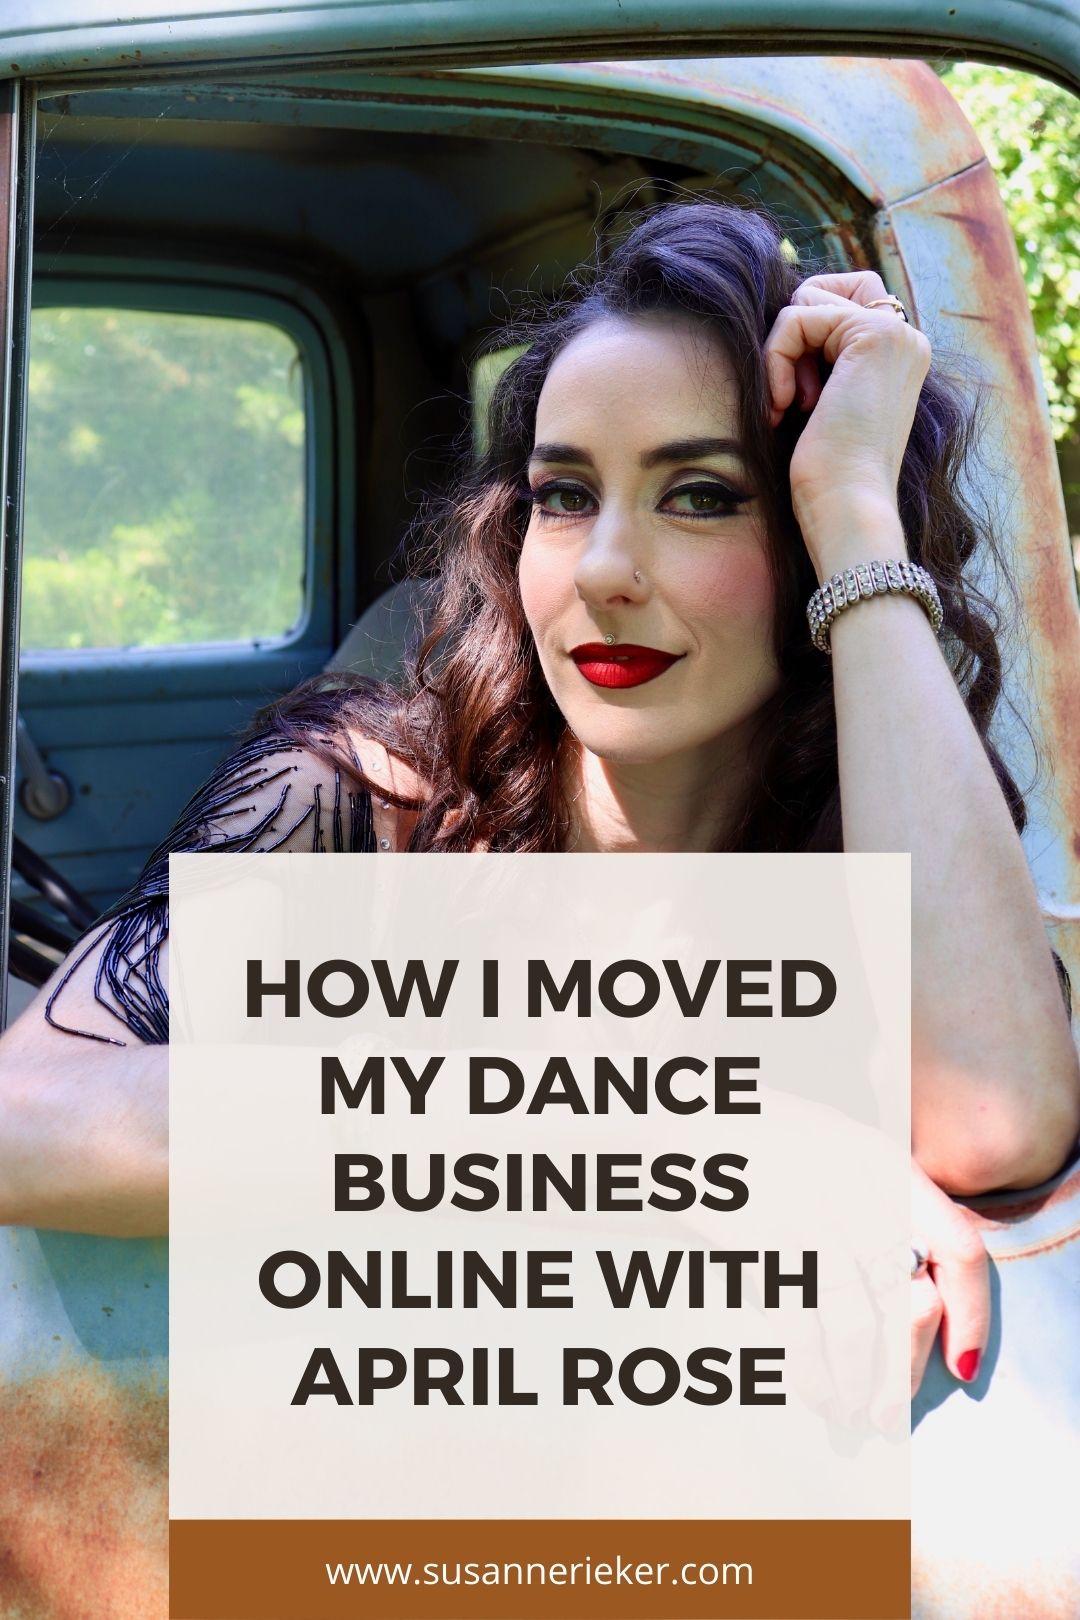 April Rose talks about how she moved her dance business online